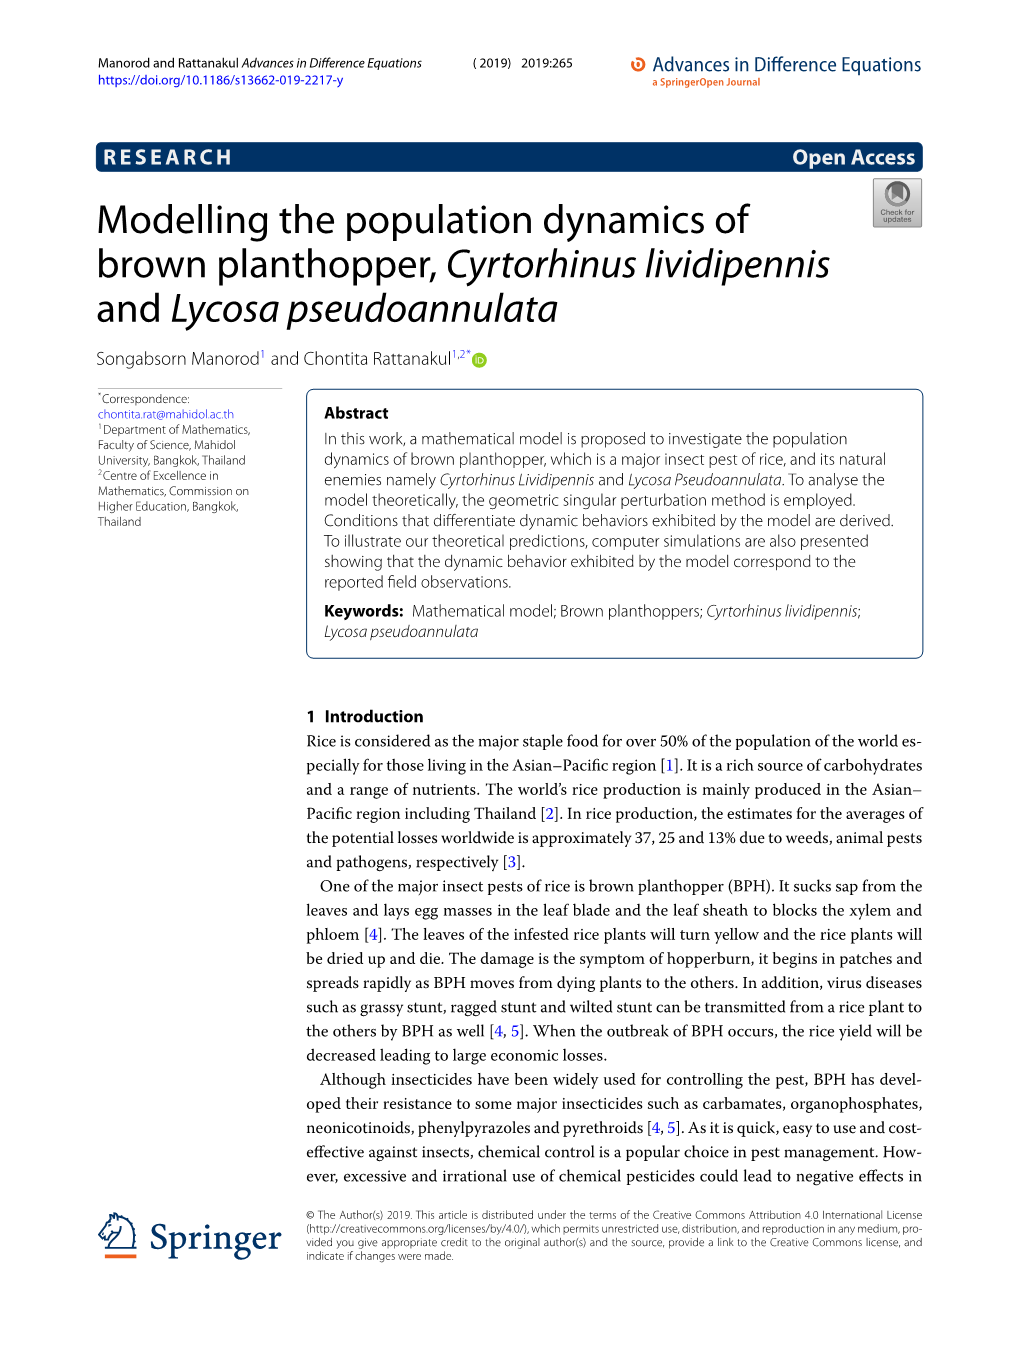 Modelling the Population Dynamics of Brown Planthopper, Cyrtorhinus Lividipennis and Lycosa Pseudoannulata